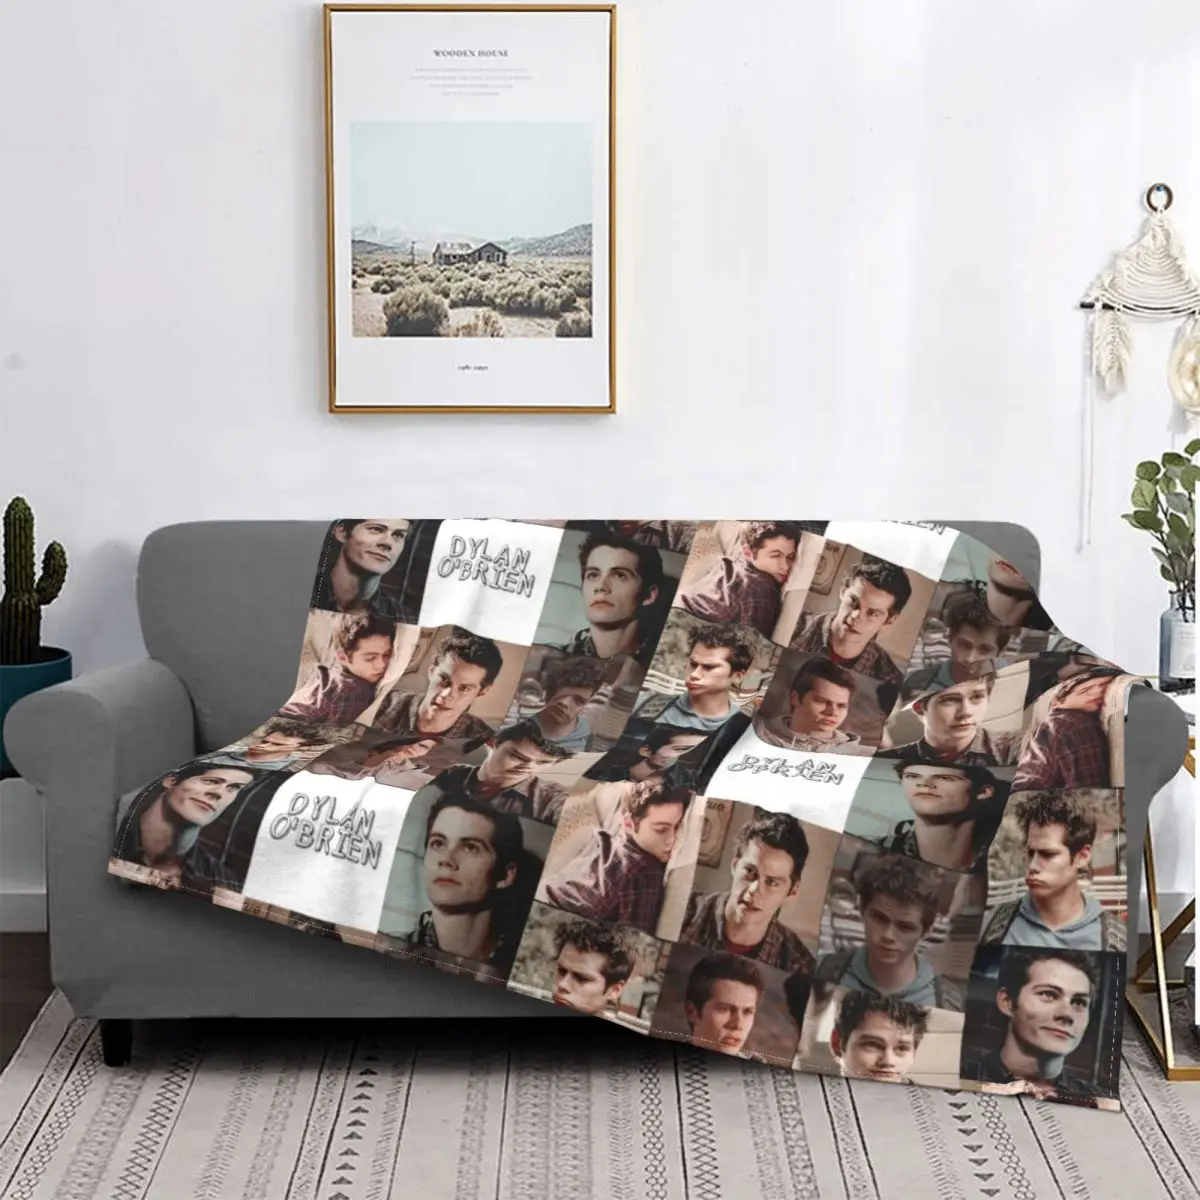 

Dylan O'brien Blanket Teen Wolf Winter Warm Bedspread Plush Soft Cover Fleece Throw Blanket Bedding Bed Couch Velvet Outlet